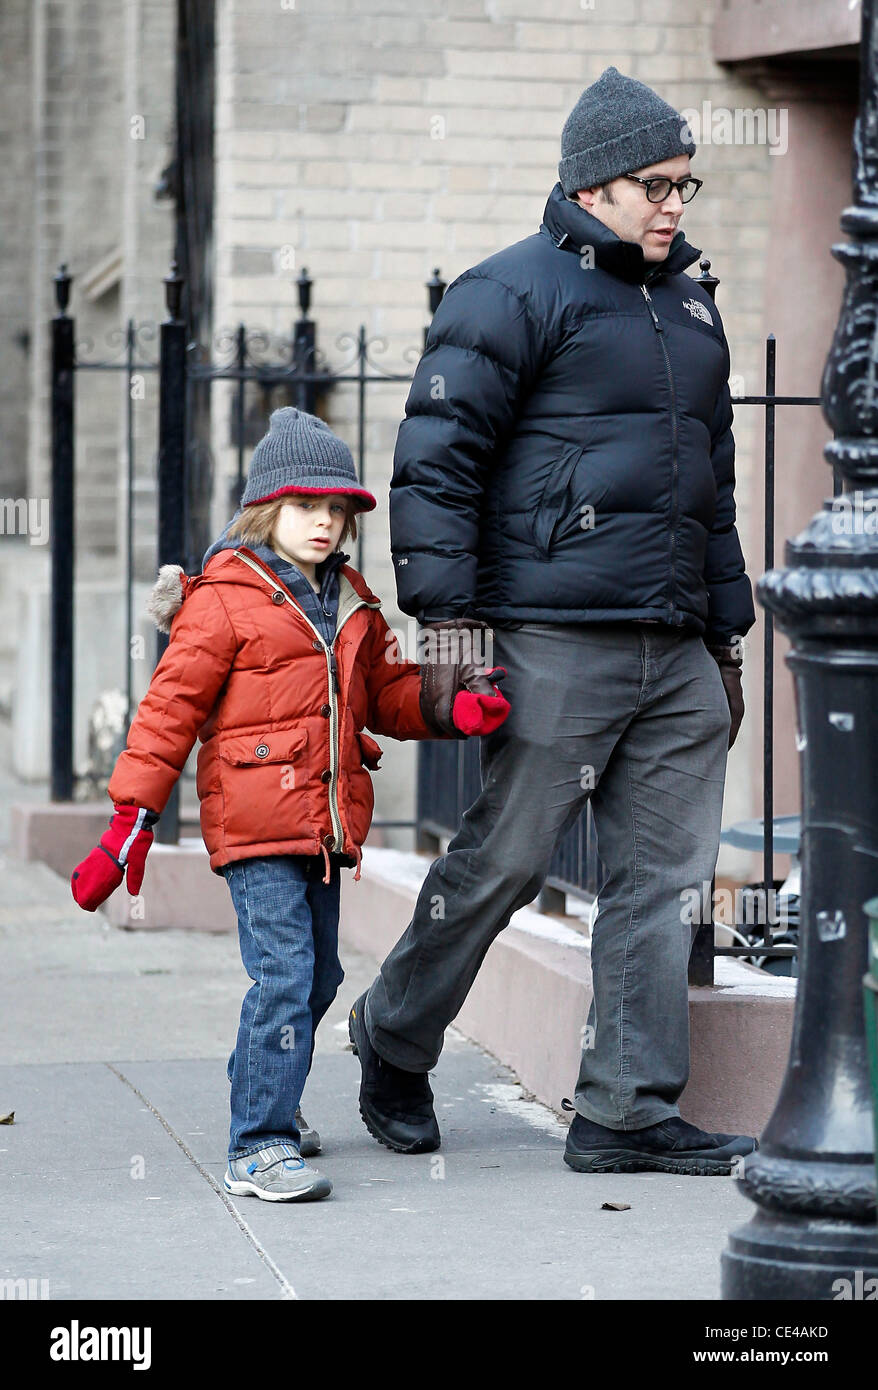 Matthew Broderick and his son James Wilke Broderick bundle up for a walk in Manhattan New York City, USA - 10.01.11 Stock Photo